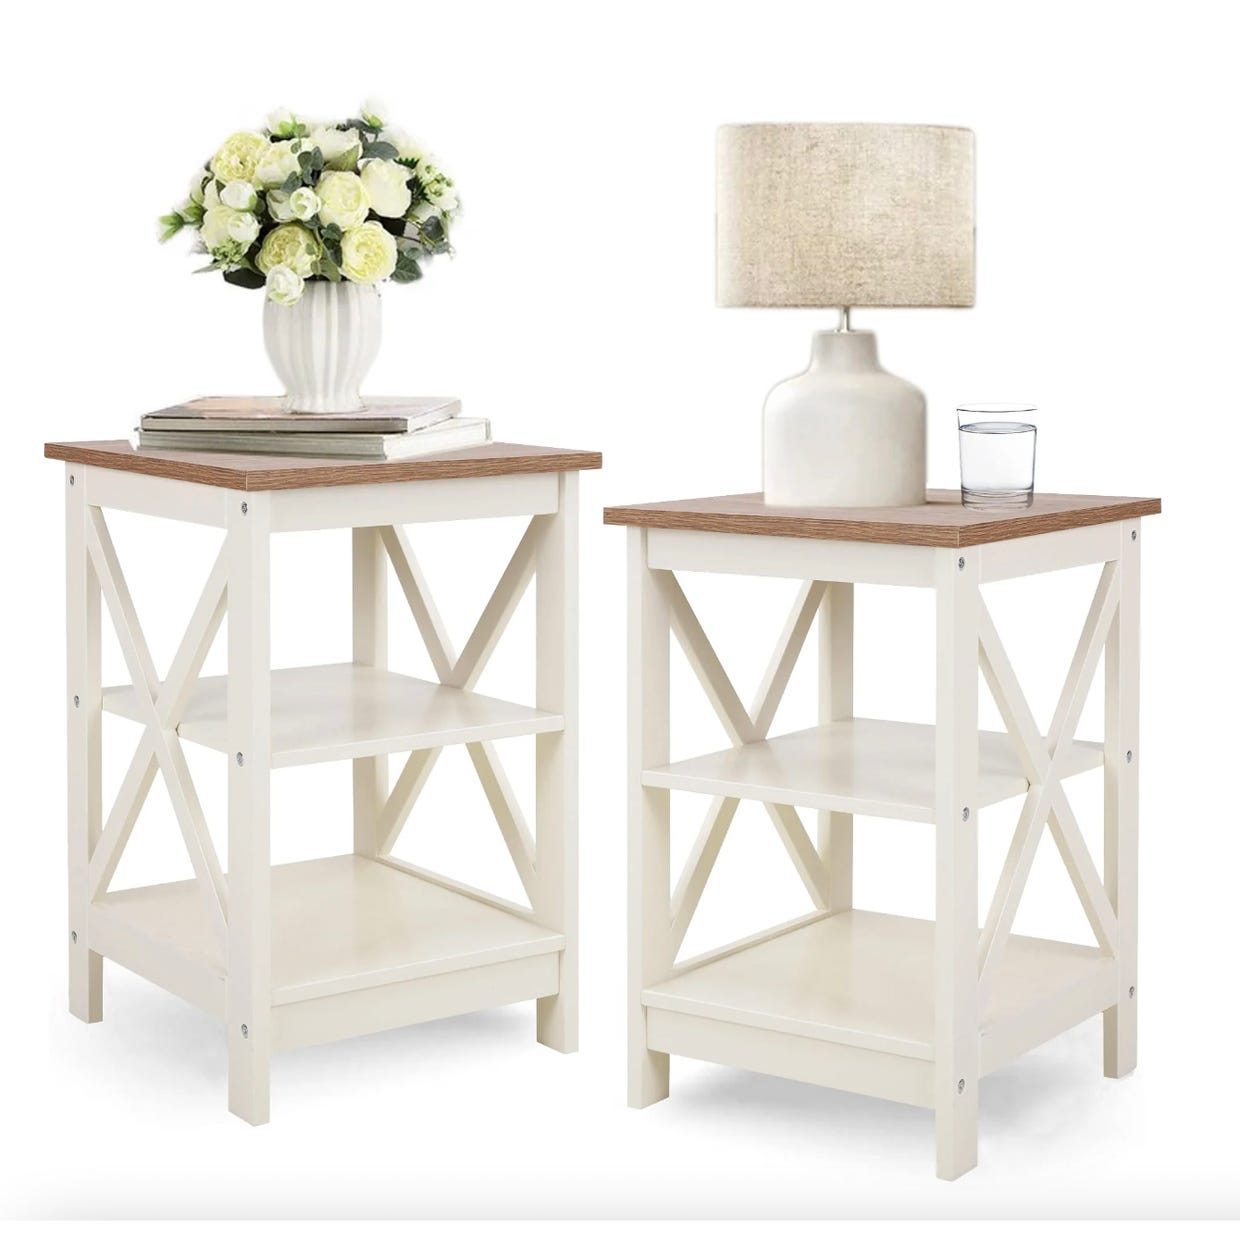 Two white and brown end tables with a cross design on the sides, one with a vase of flowers and one with a lamp and glass.